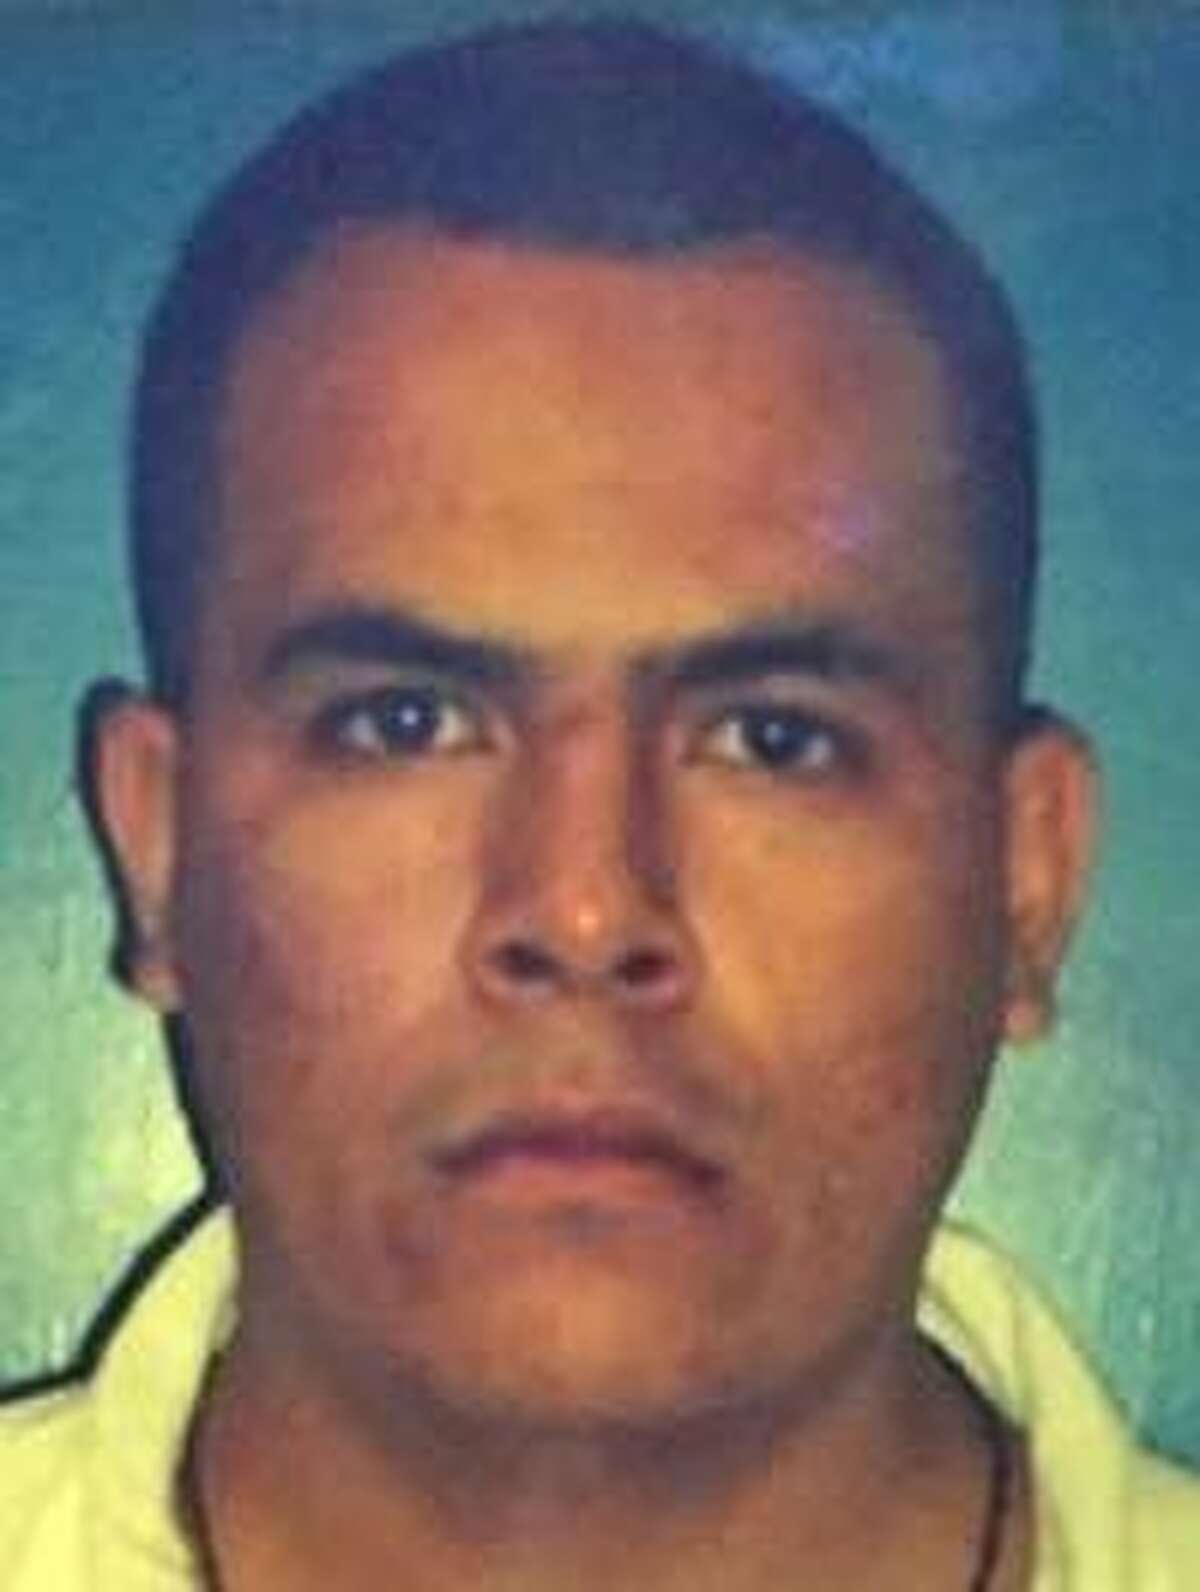 Jose Fernando Bustos-Diaz was added to the Texas Most Wanted list.